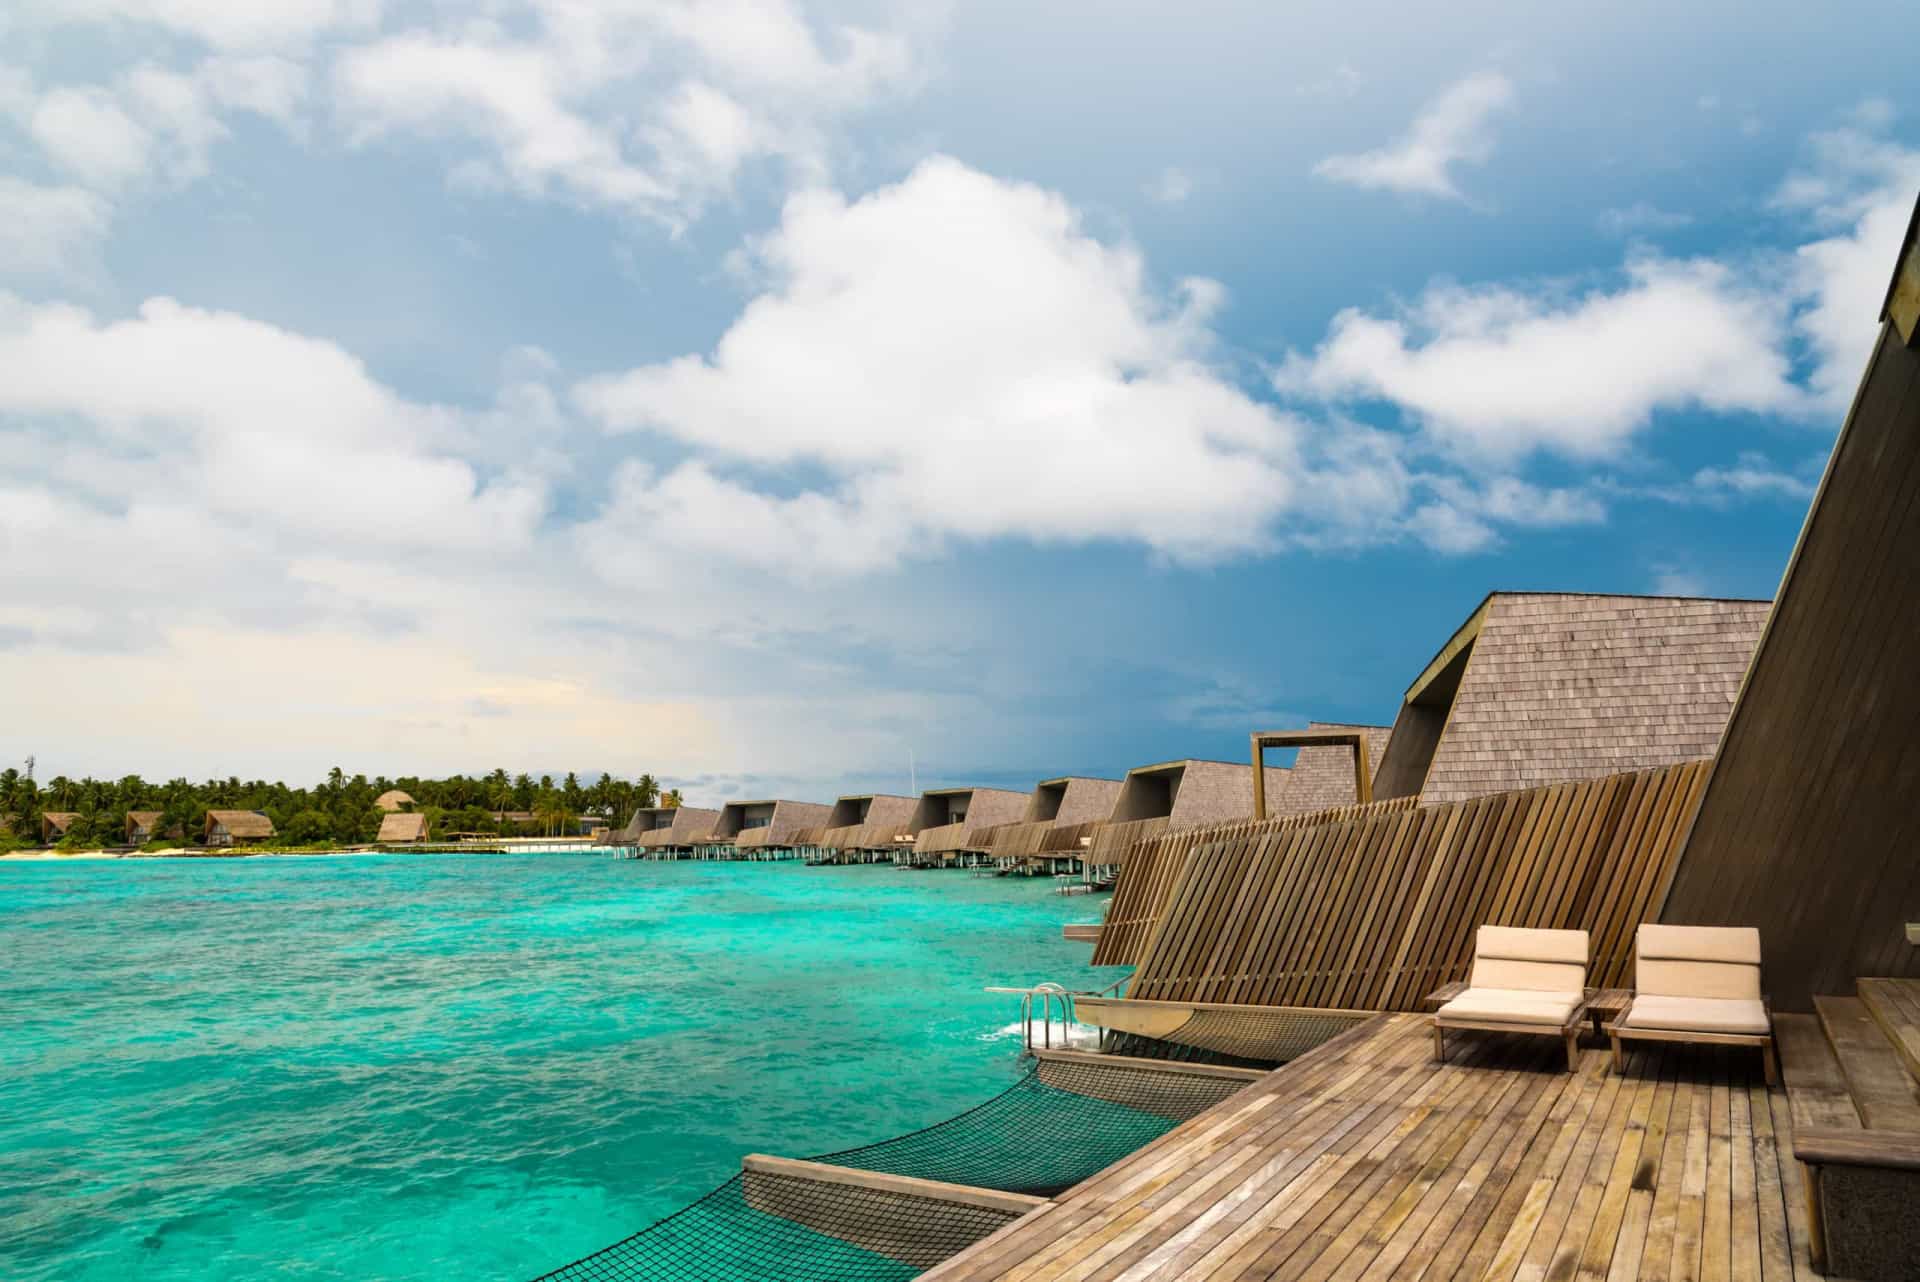 <p>There are around 130 resorts in the Maldives, but the St. Regis Resort is considered one of the most opulent. Every resort has "water villas," which are houses on stilts where you can wake up to crystal blue water.</p>